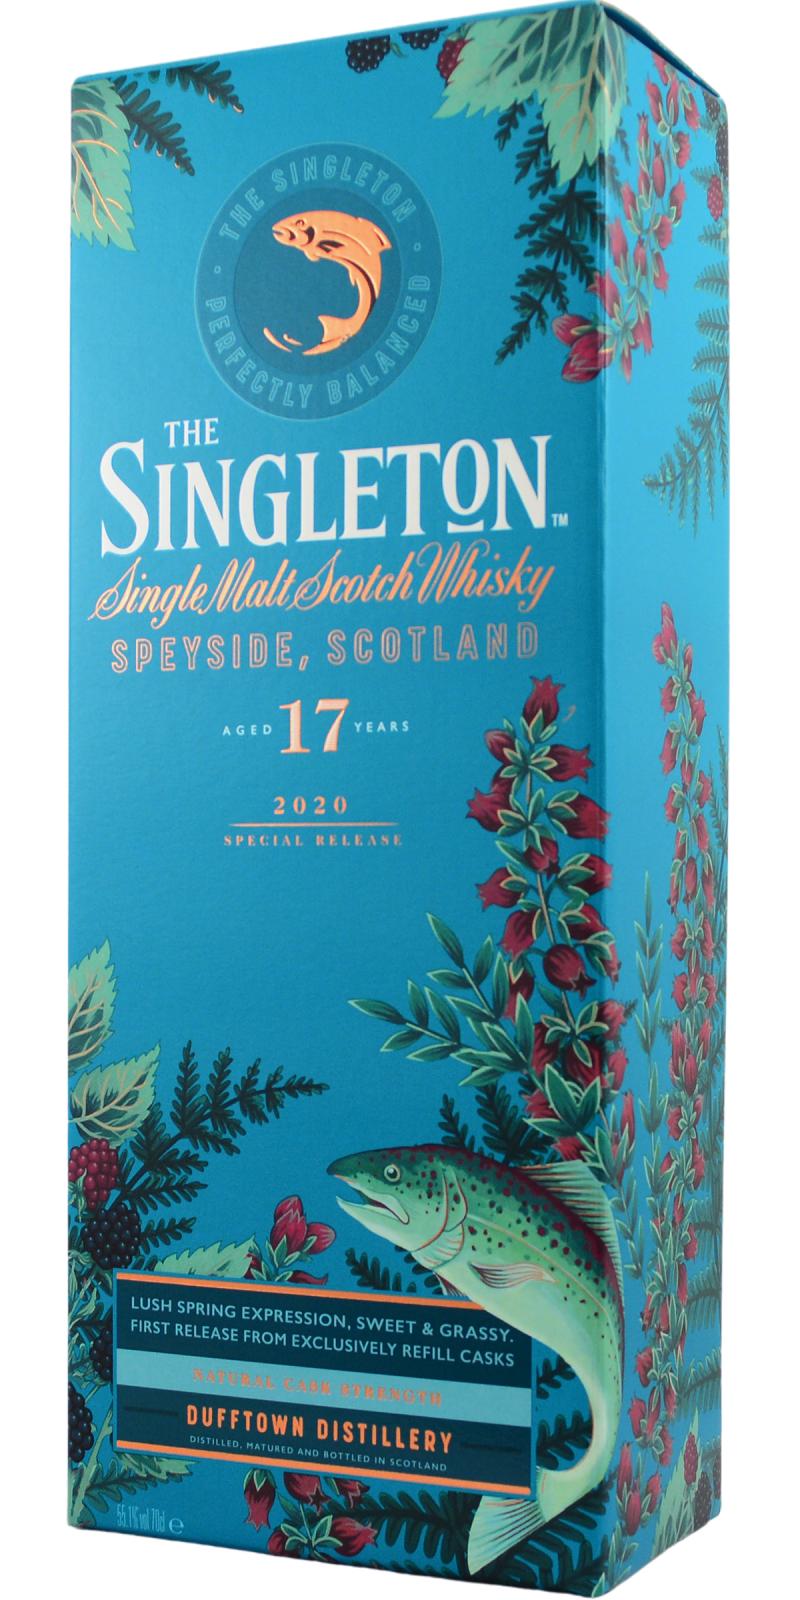 The Singleton of Dufftown 17-year-old